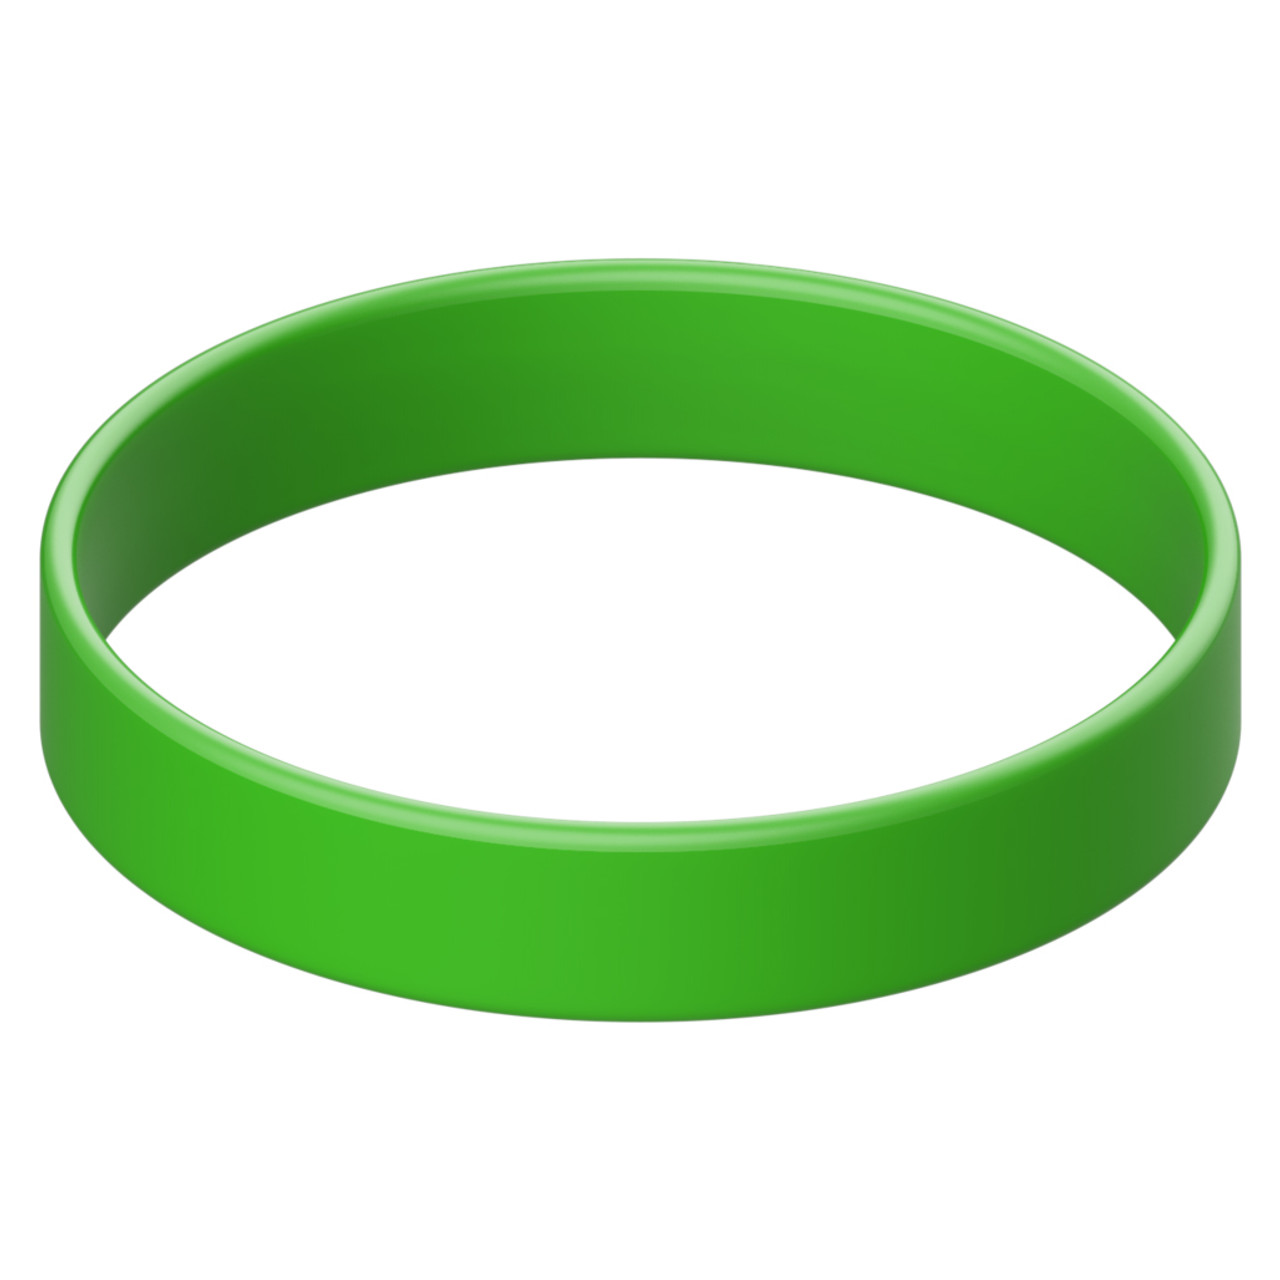 Solid color green - blank rubber wristband - silicone bracelet